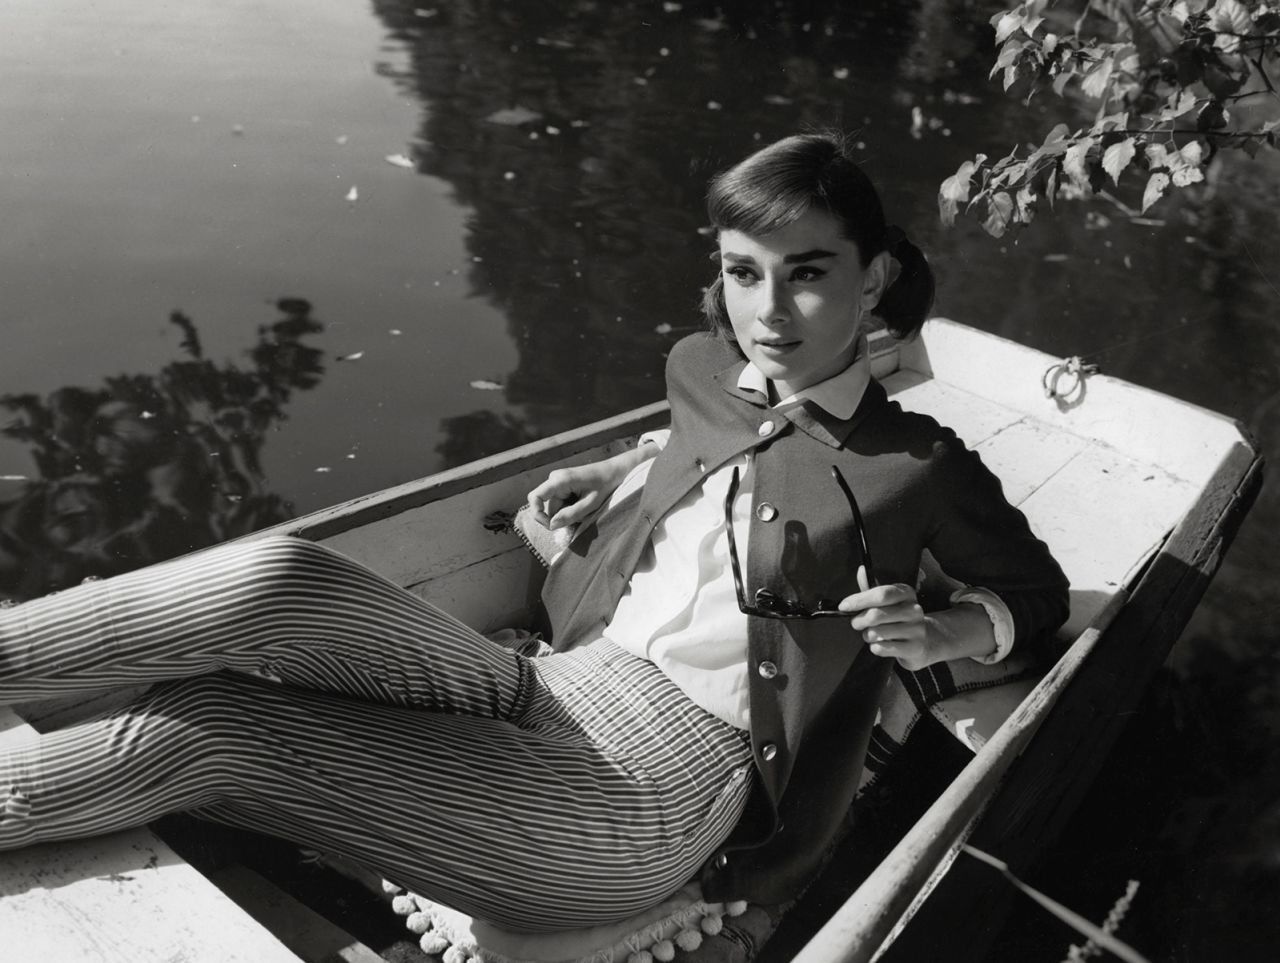 Effortlessly chic, Audrey Hepburn is pictured in the movie "Love in the Afternoon," wearing a pair of fitted plaid capri pants, a light cardigan and crisp white button-down shirt.